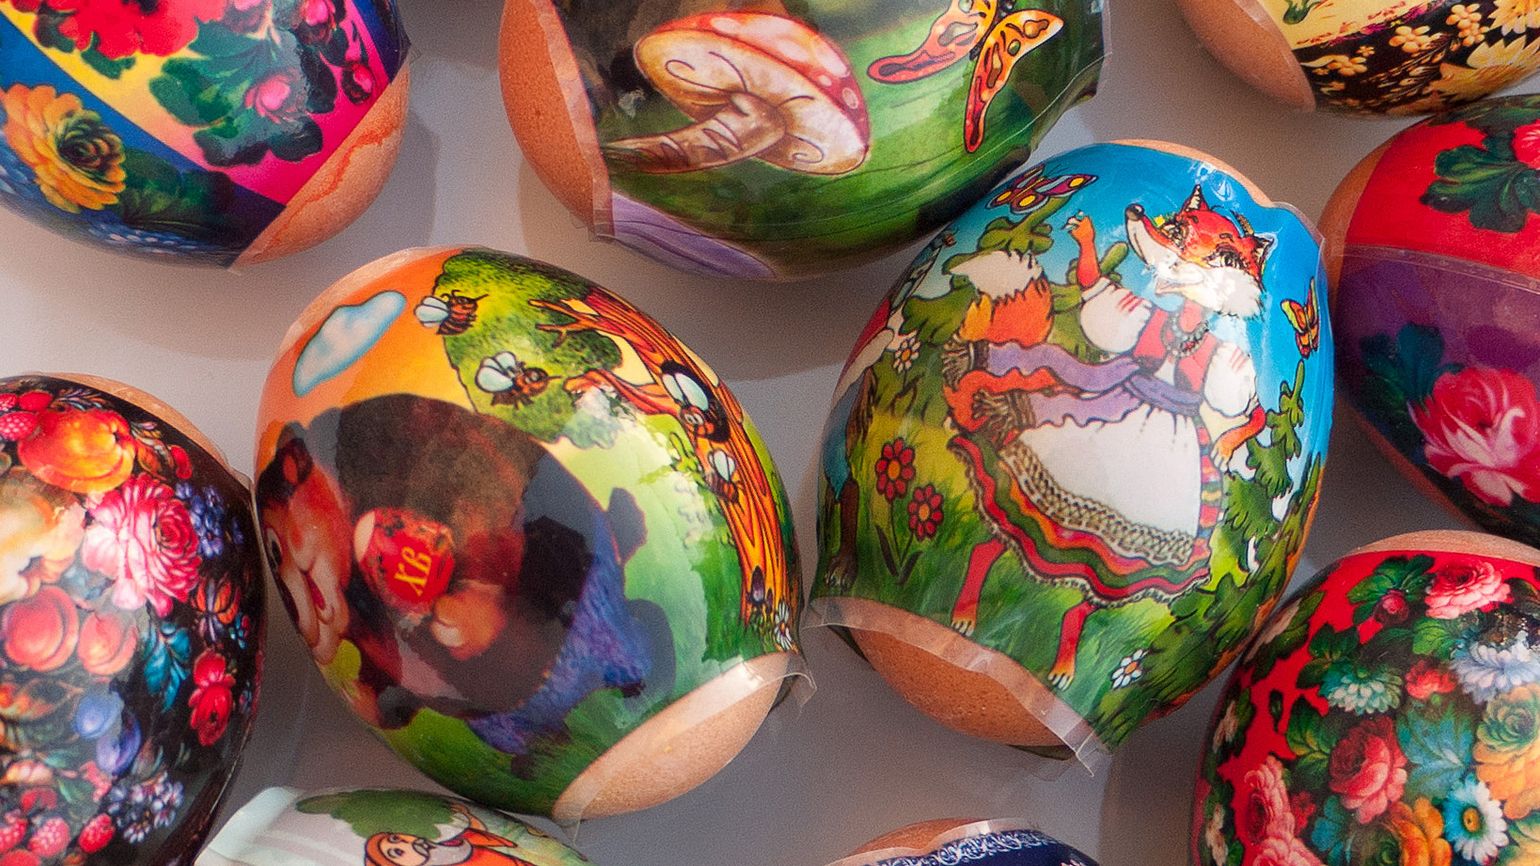 Intricate designed Easter eggs from Russia